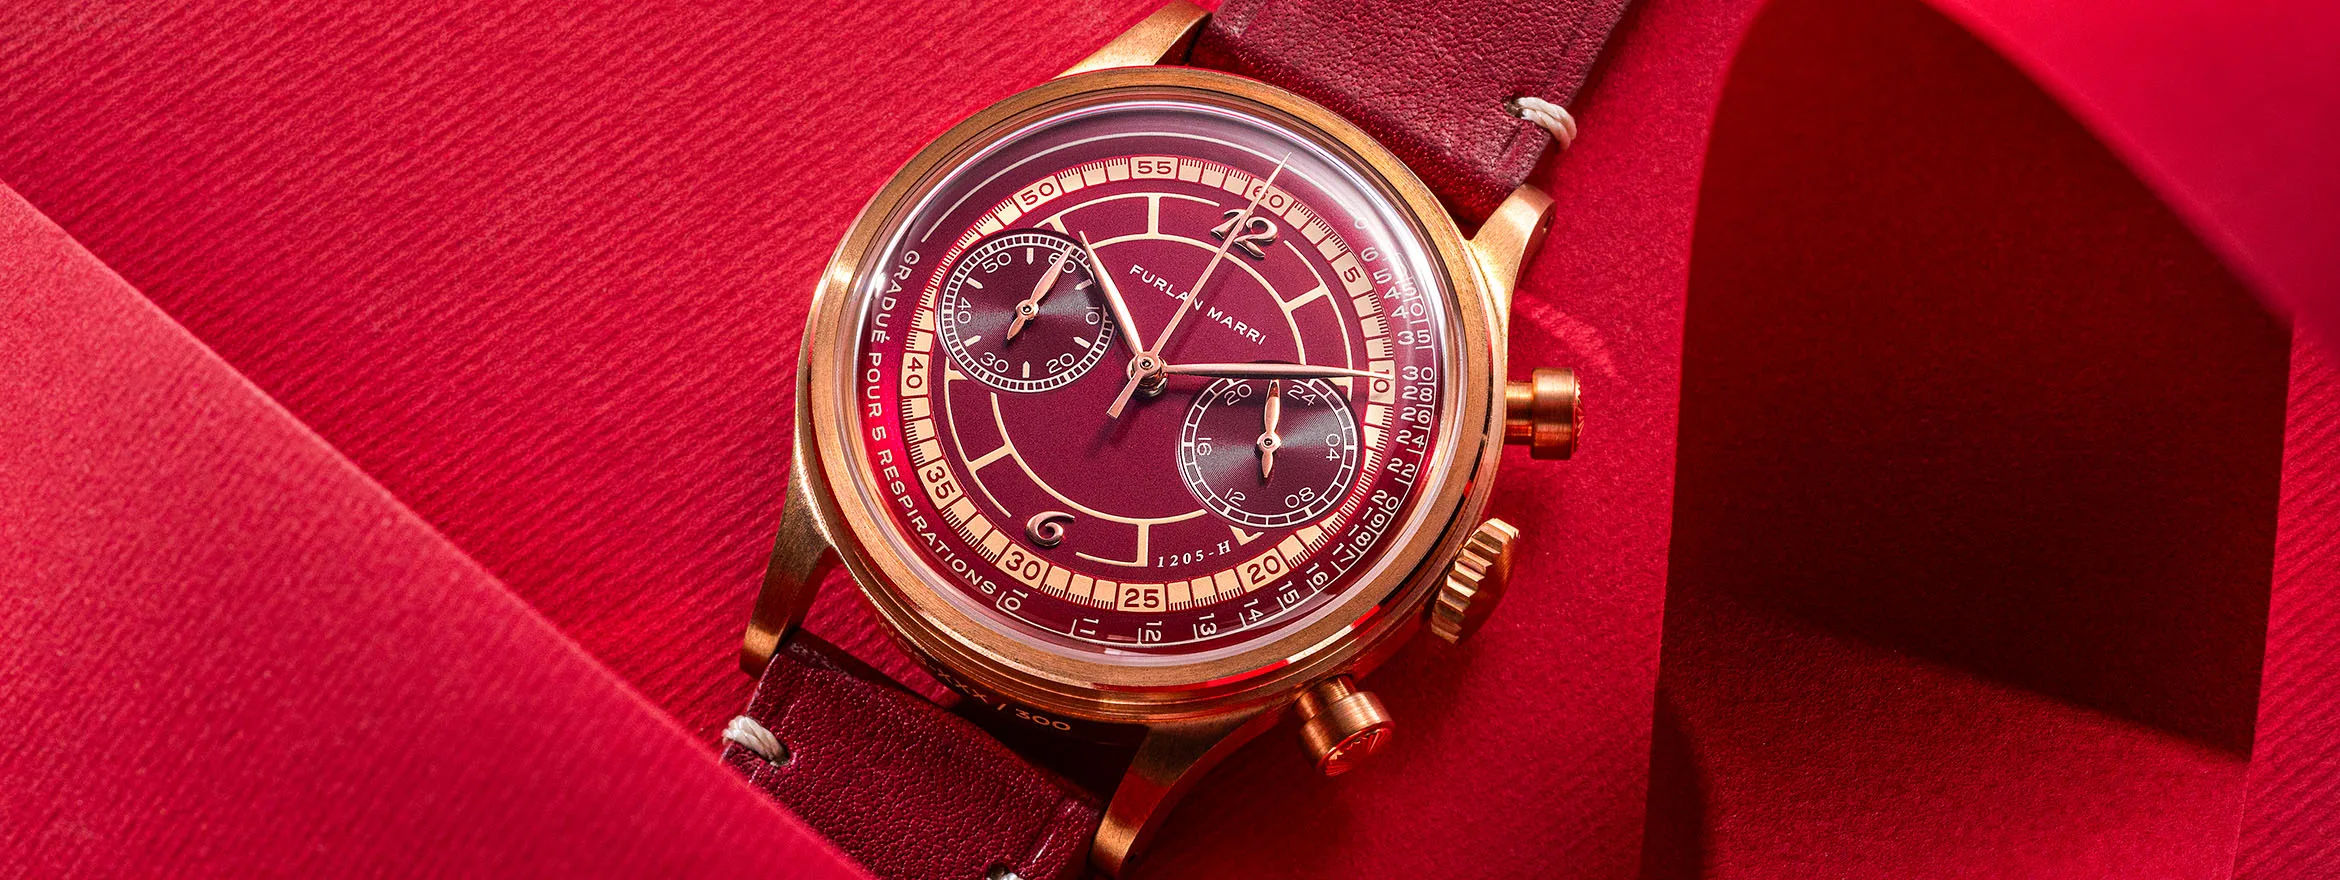 A limited edition Chronograph!